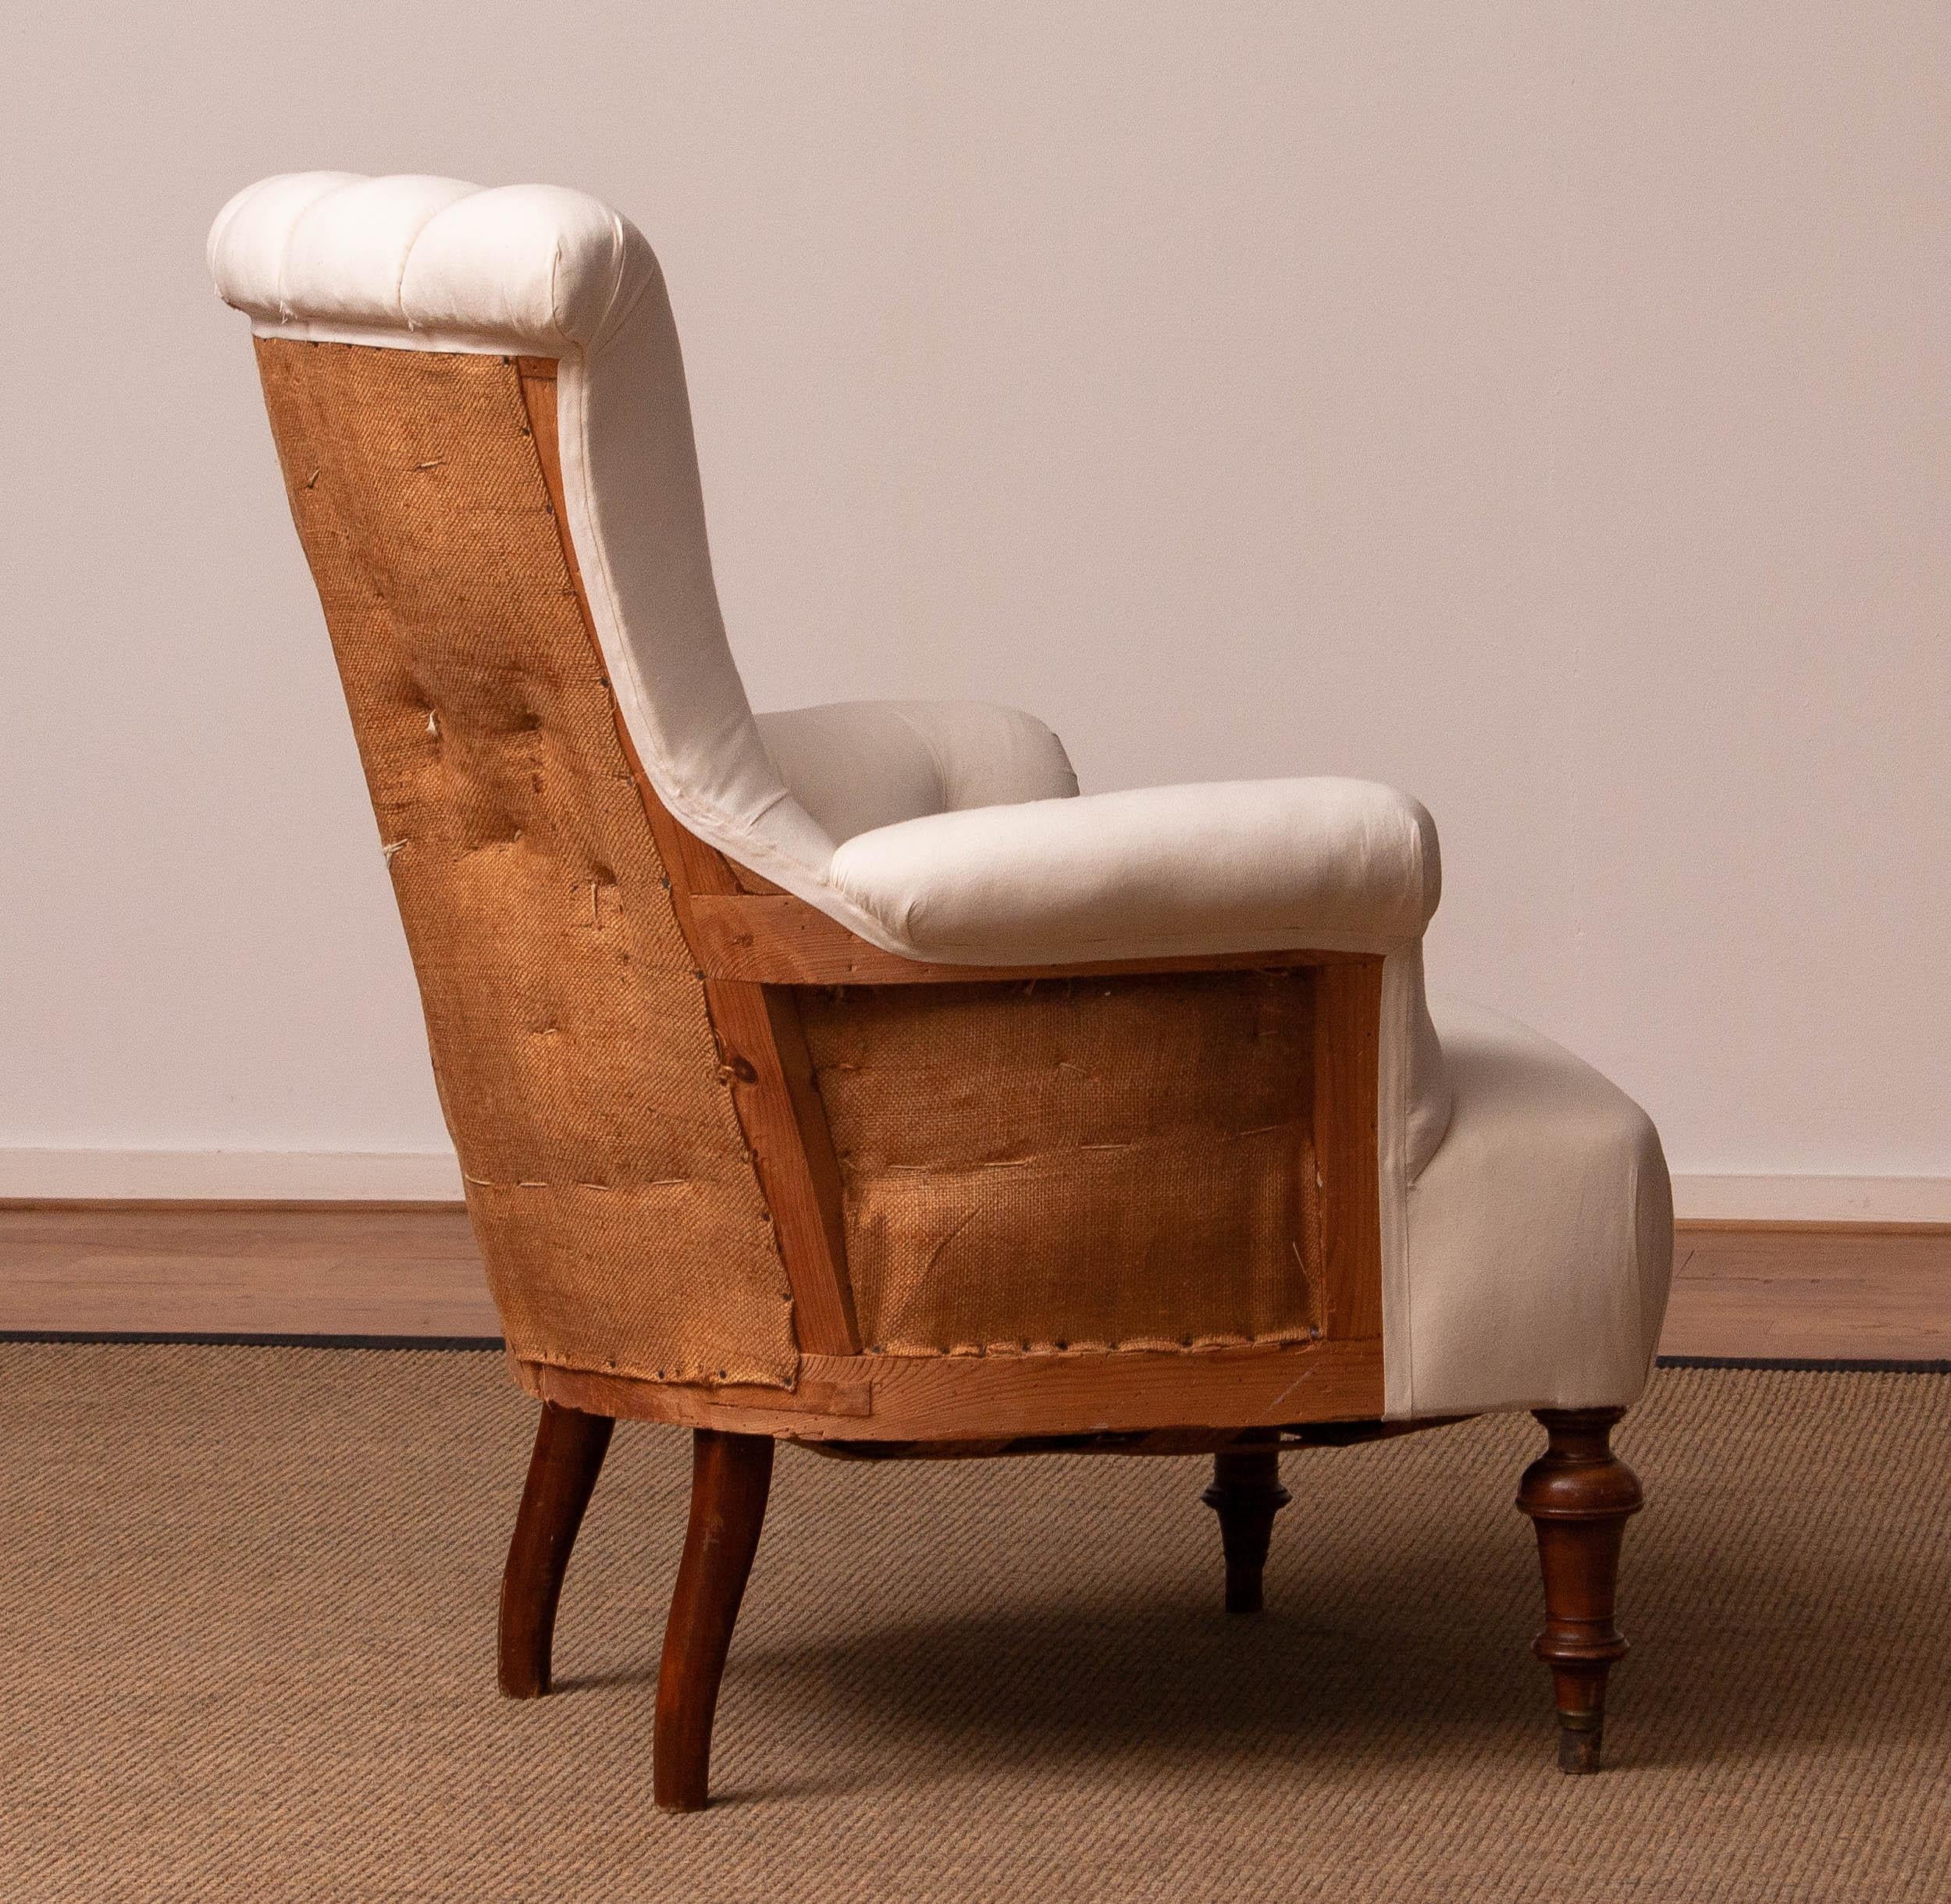 Swedish 19th Century White Cotton Victorian 'Deconstructed' Tufted Scroll-Back Chair For Sale